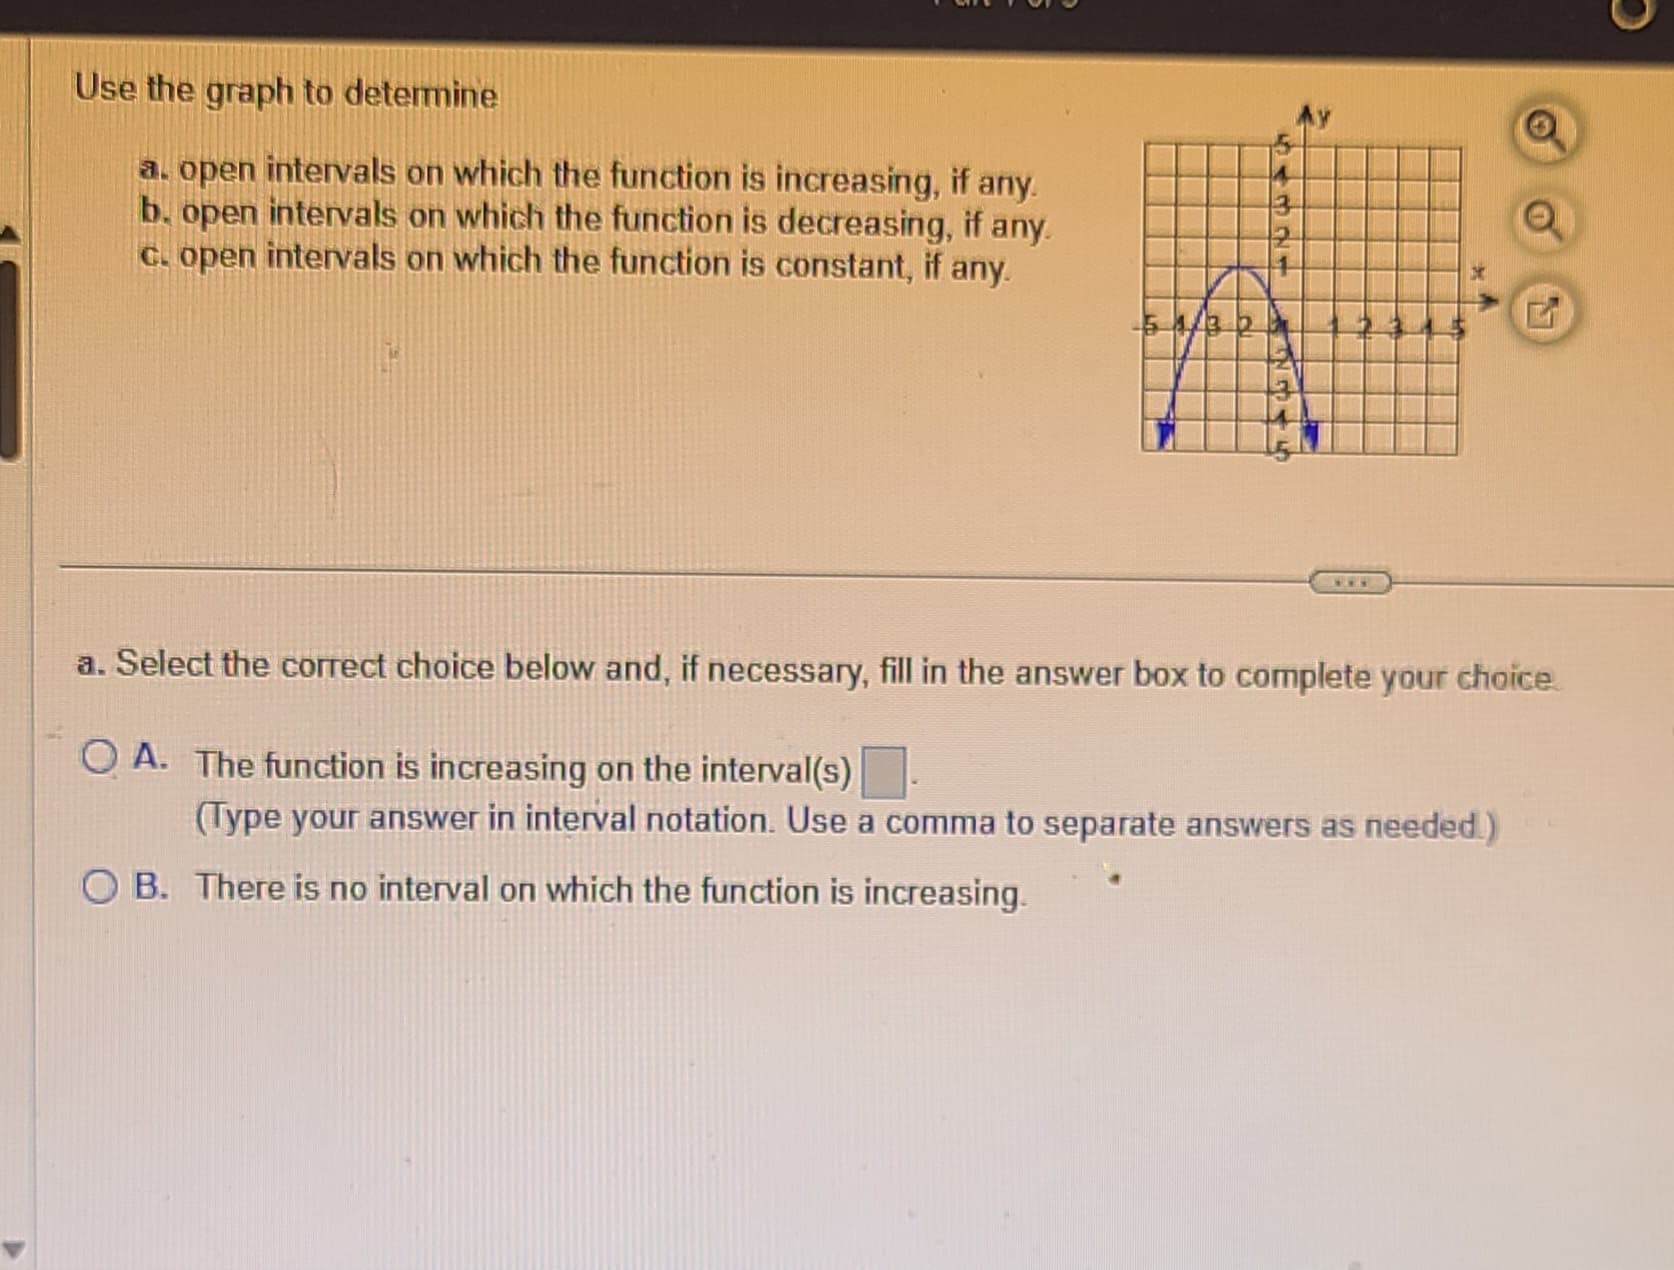 Use the graph to determine
a. open intervals on which the function is increasing, if any.
b. open intervals on which the function is decreasing, if any.
c. open intervals on which the function is constant, if any.
54/3 20
VI
A
a. Select the correct choice below and, if necessary, fill in the answer box to complete your choice.
OA. The function is increasing on the interval(s)
(Type your answer in interval notation. Use a comma to separate answers as needed.)
OB. There is no interval on which the function is increasing.